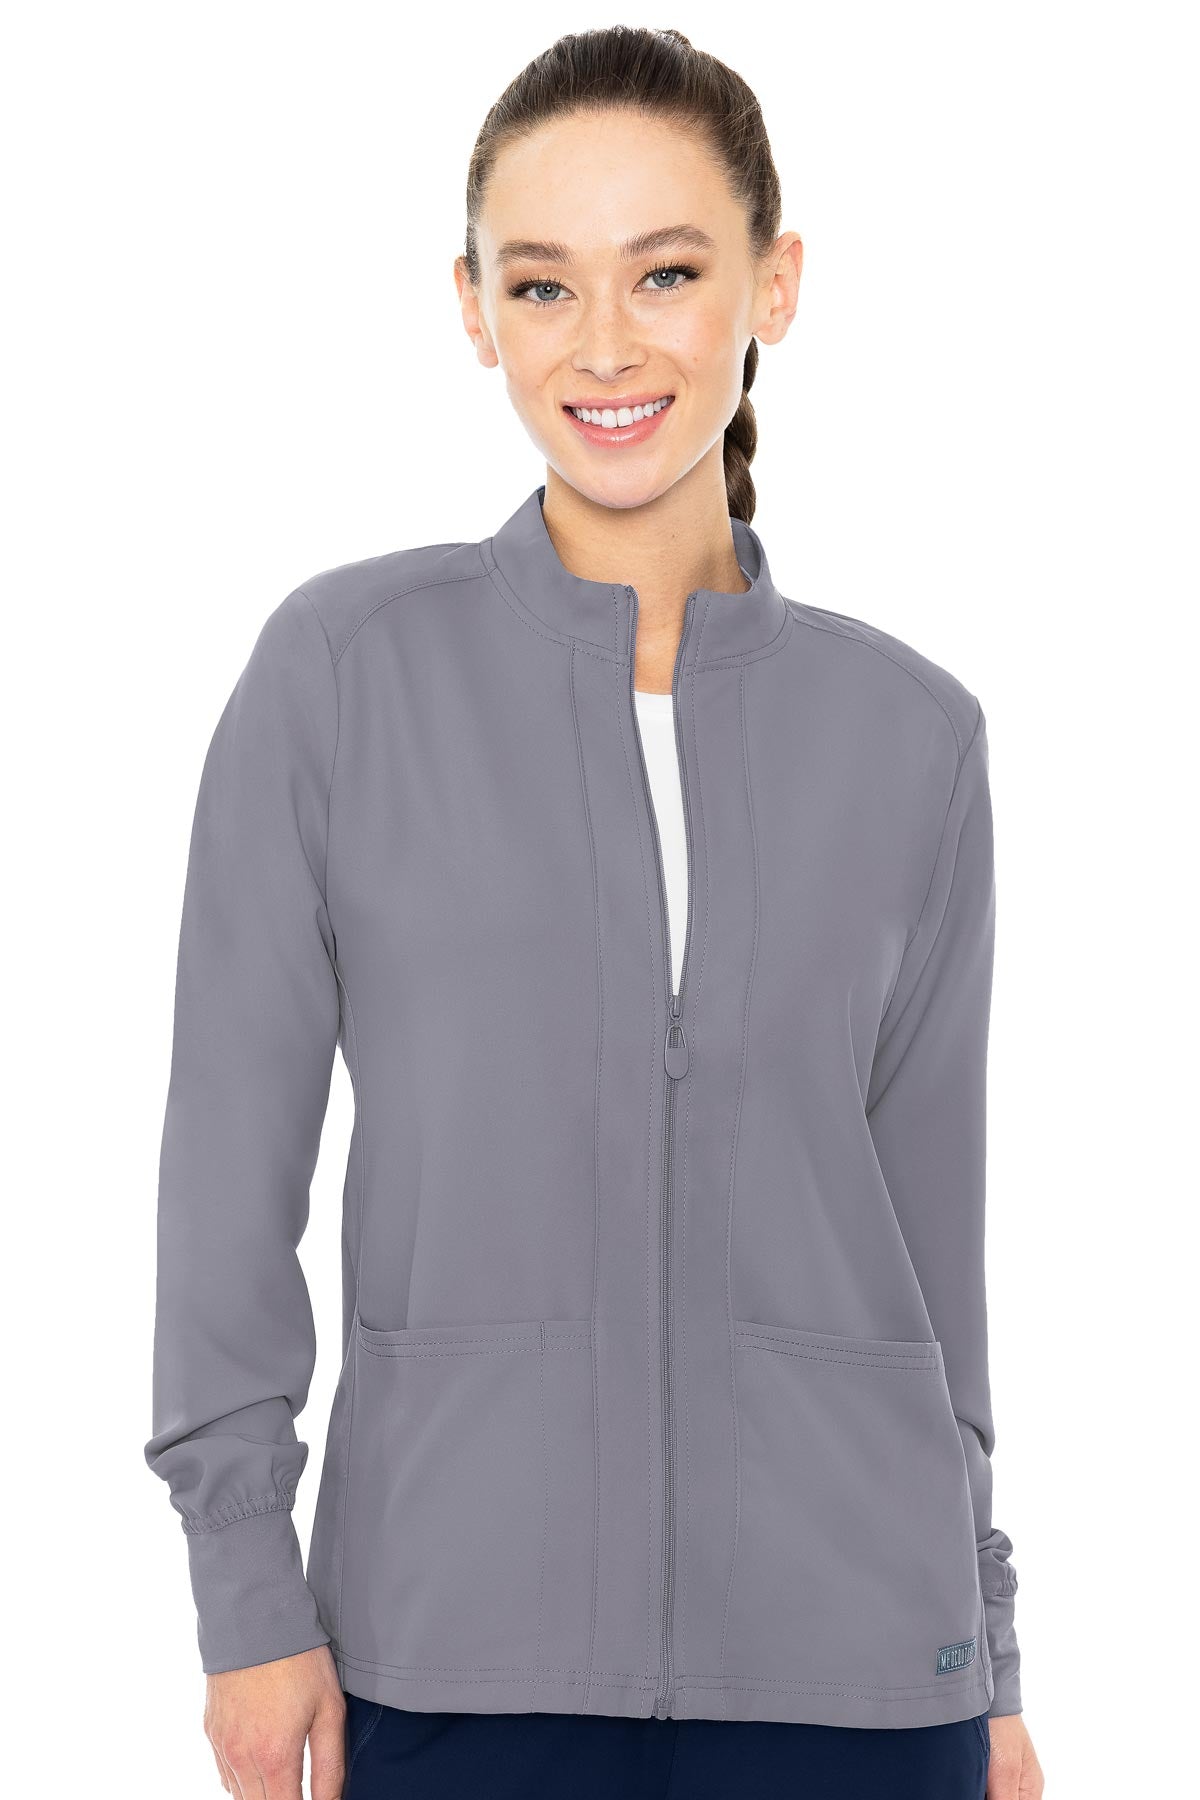 Zip Front Warm-Up With Shoulder Yokes  by Med Couture XS-5XL / Cloud